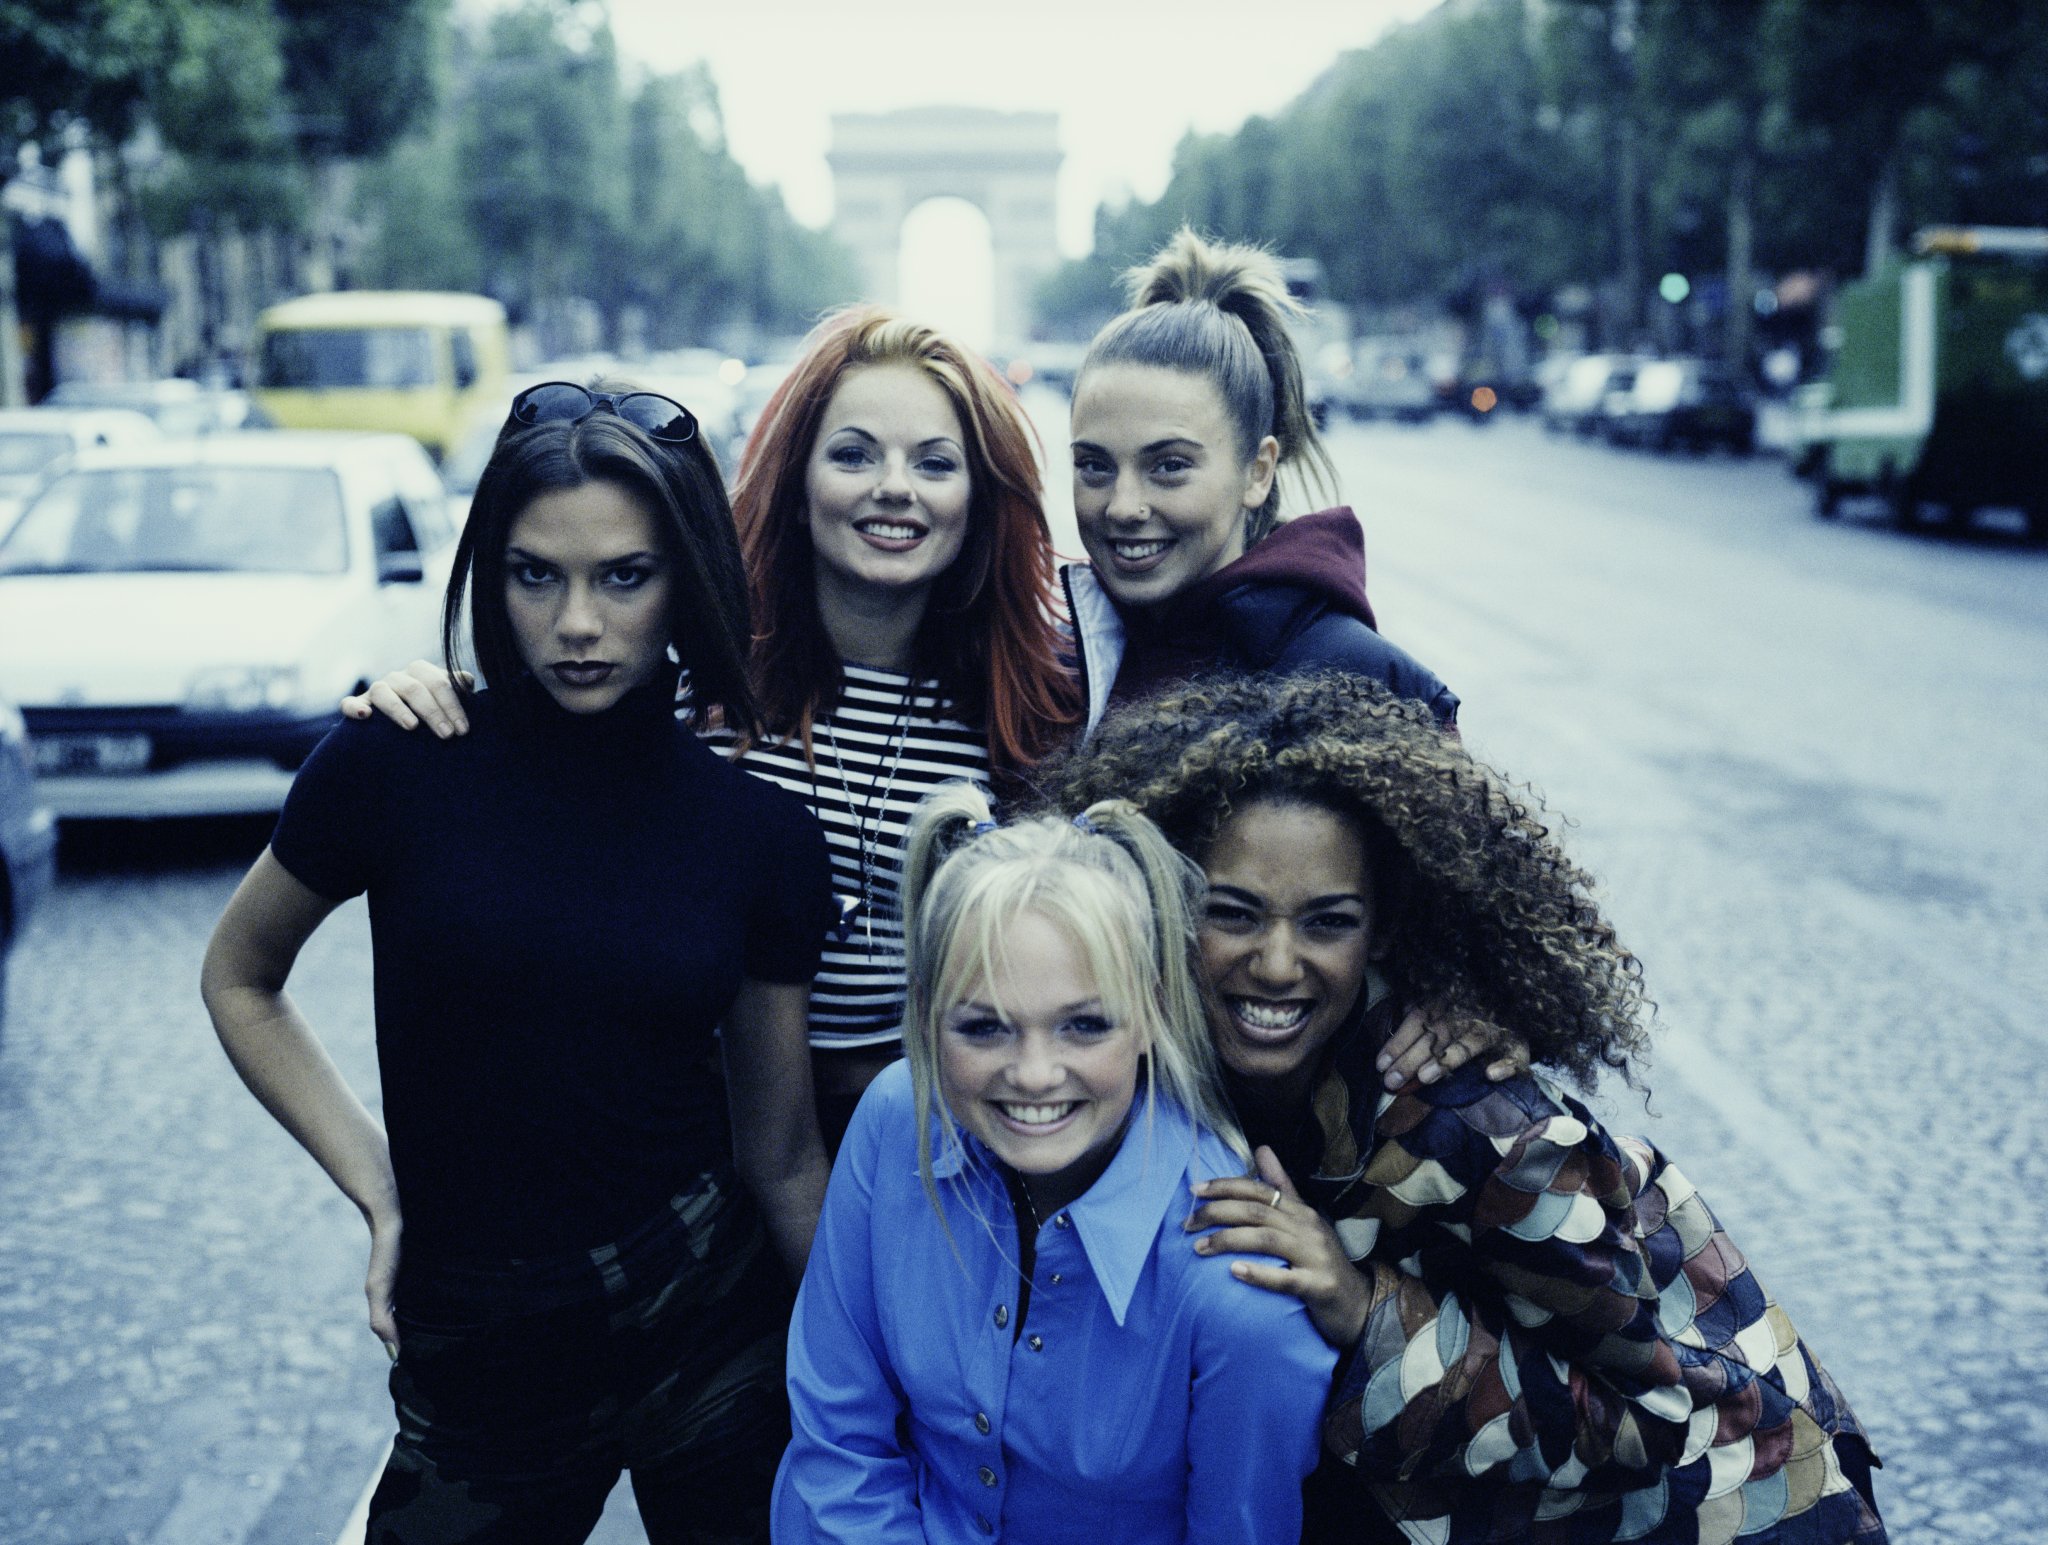 The Most Influential Artists: #30 Spice Girls